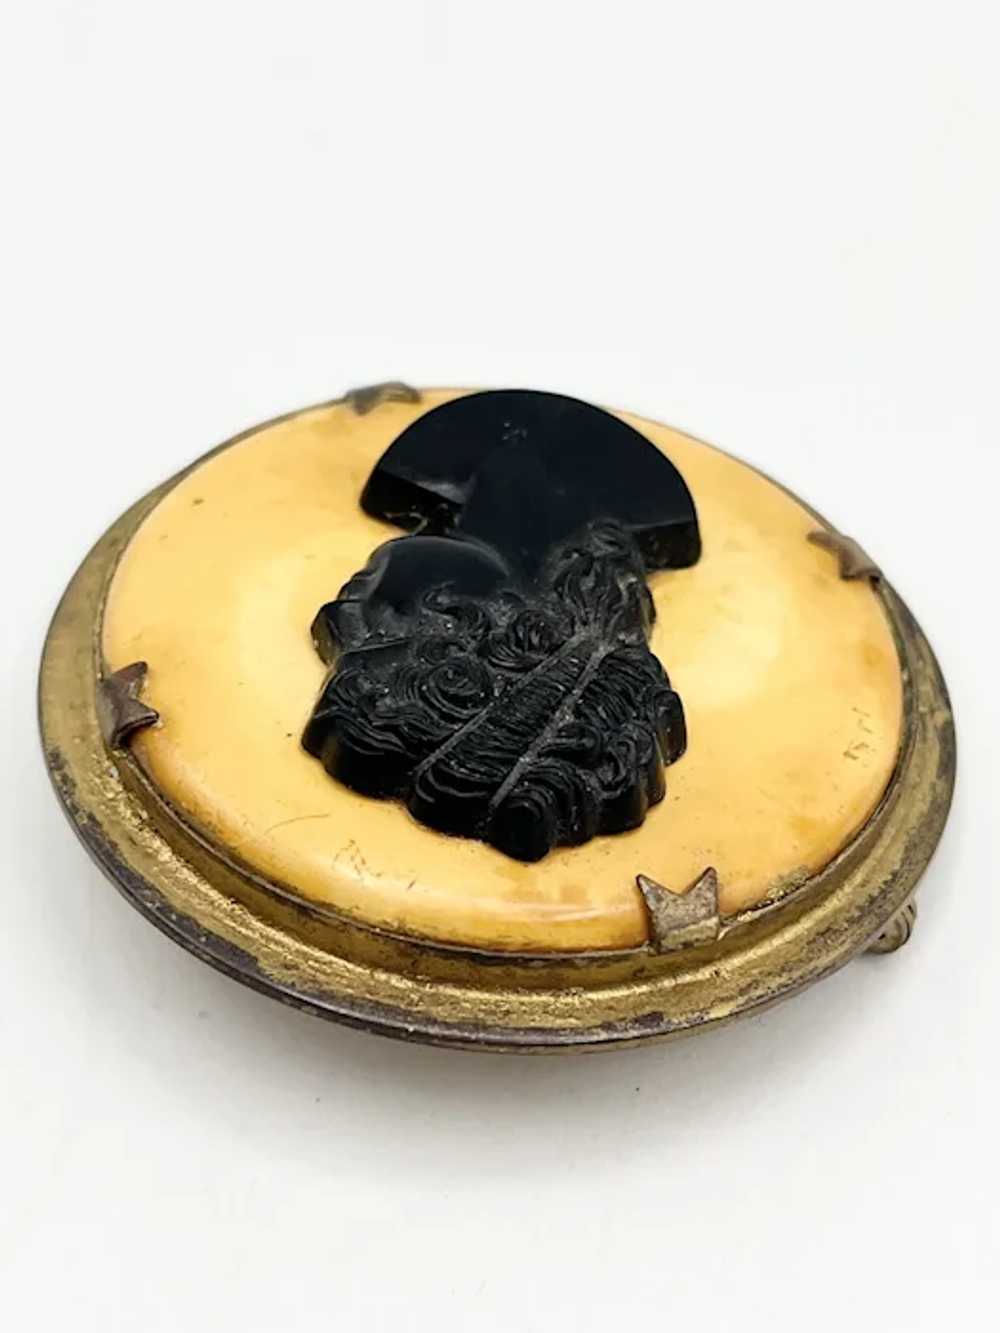 Vintage Black Cameo Celluloid Brooch Pin - image 4